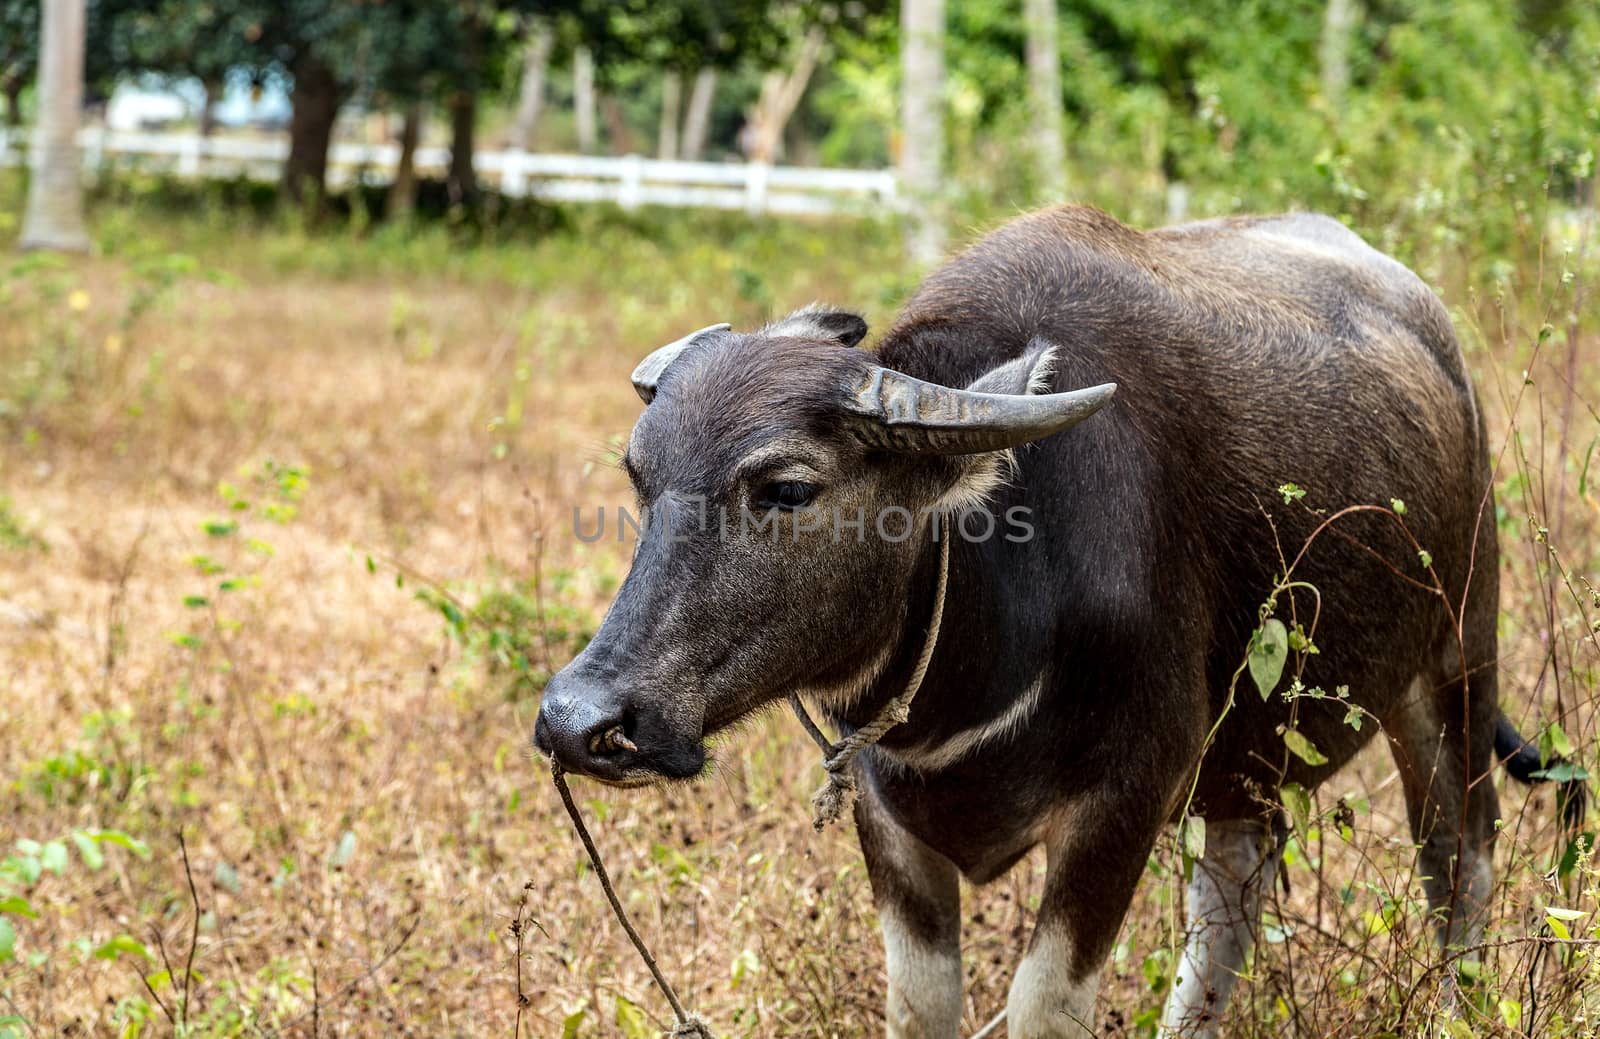 Asia water buffalo cattle farm or Carabao in Thailand forest by Vladyslav